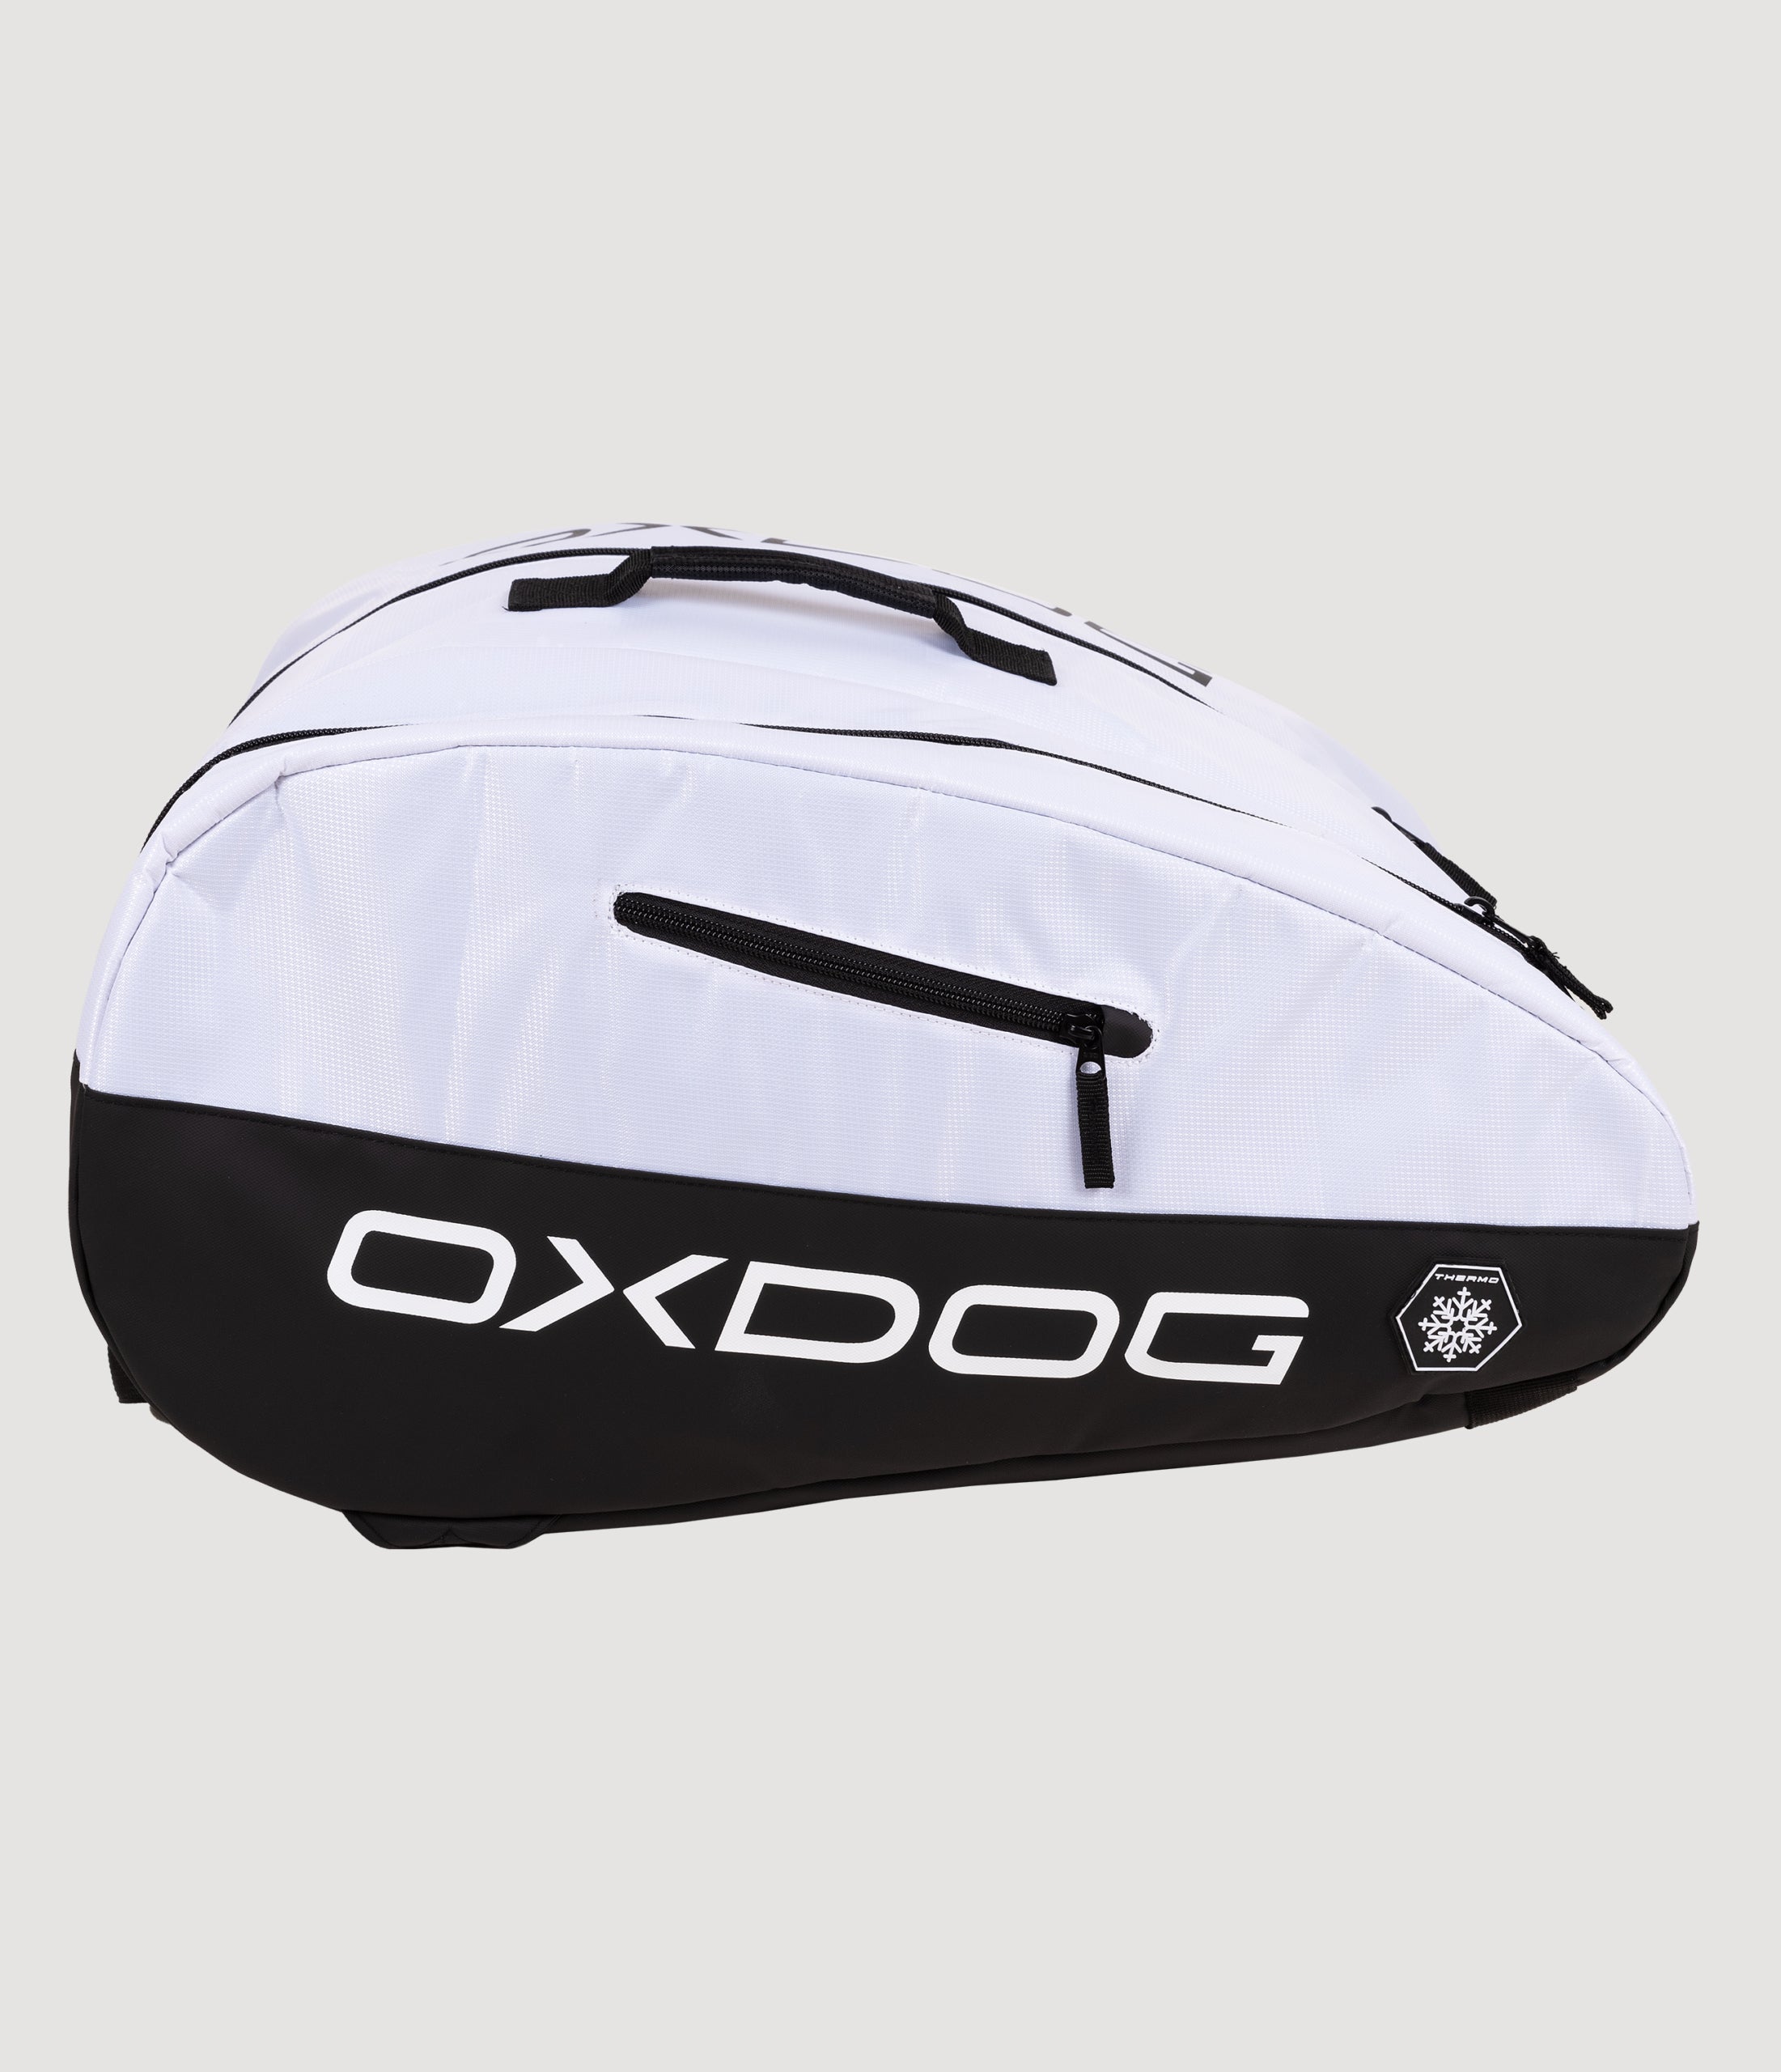 Oxdog Ultra Tour Pro Thermo Padel Bag